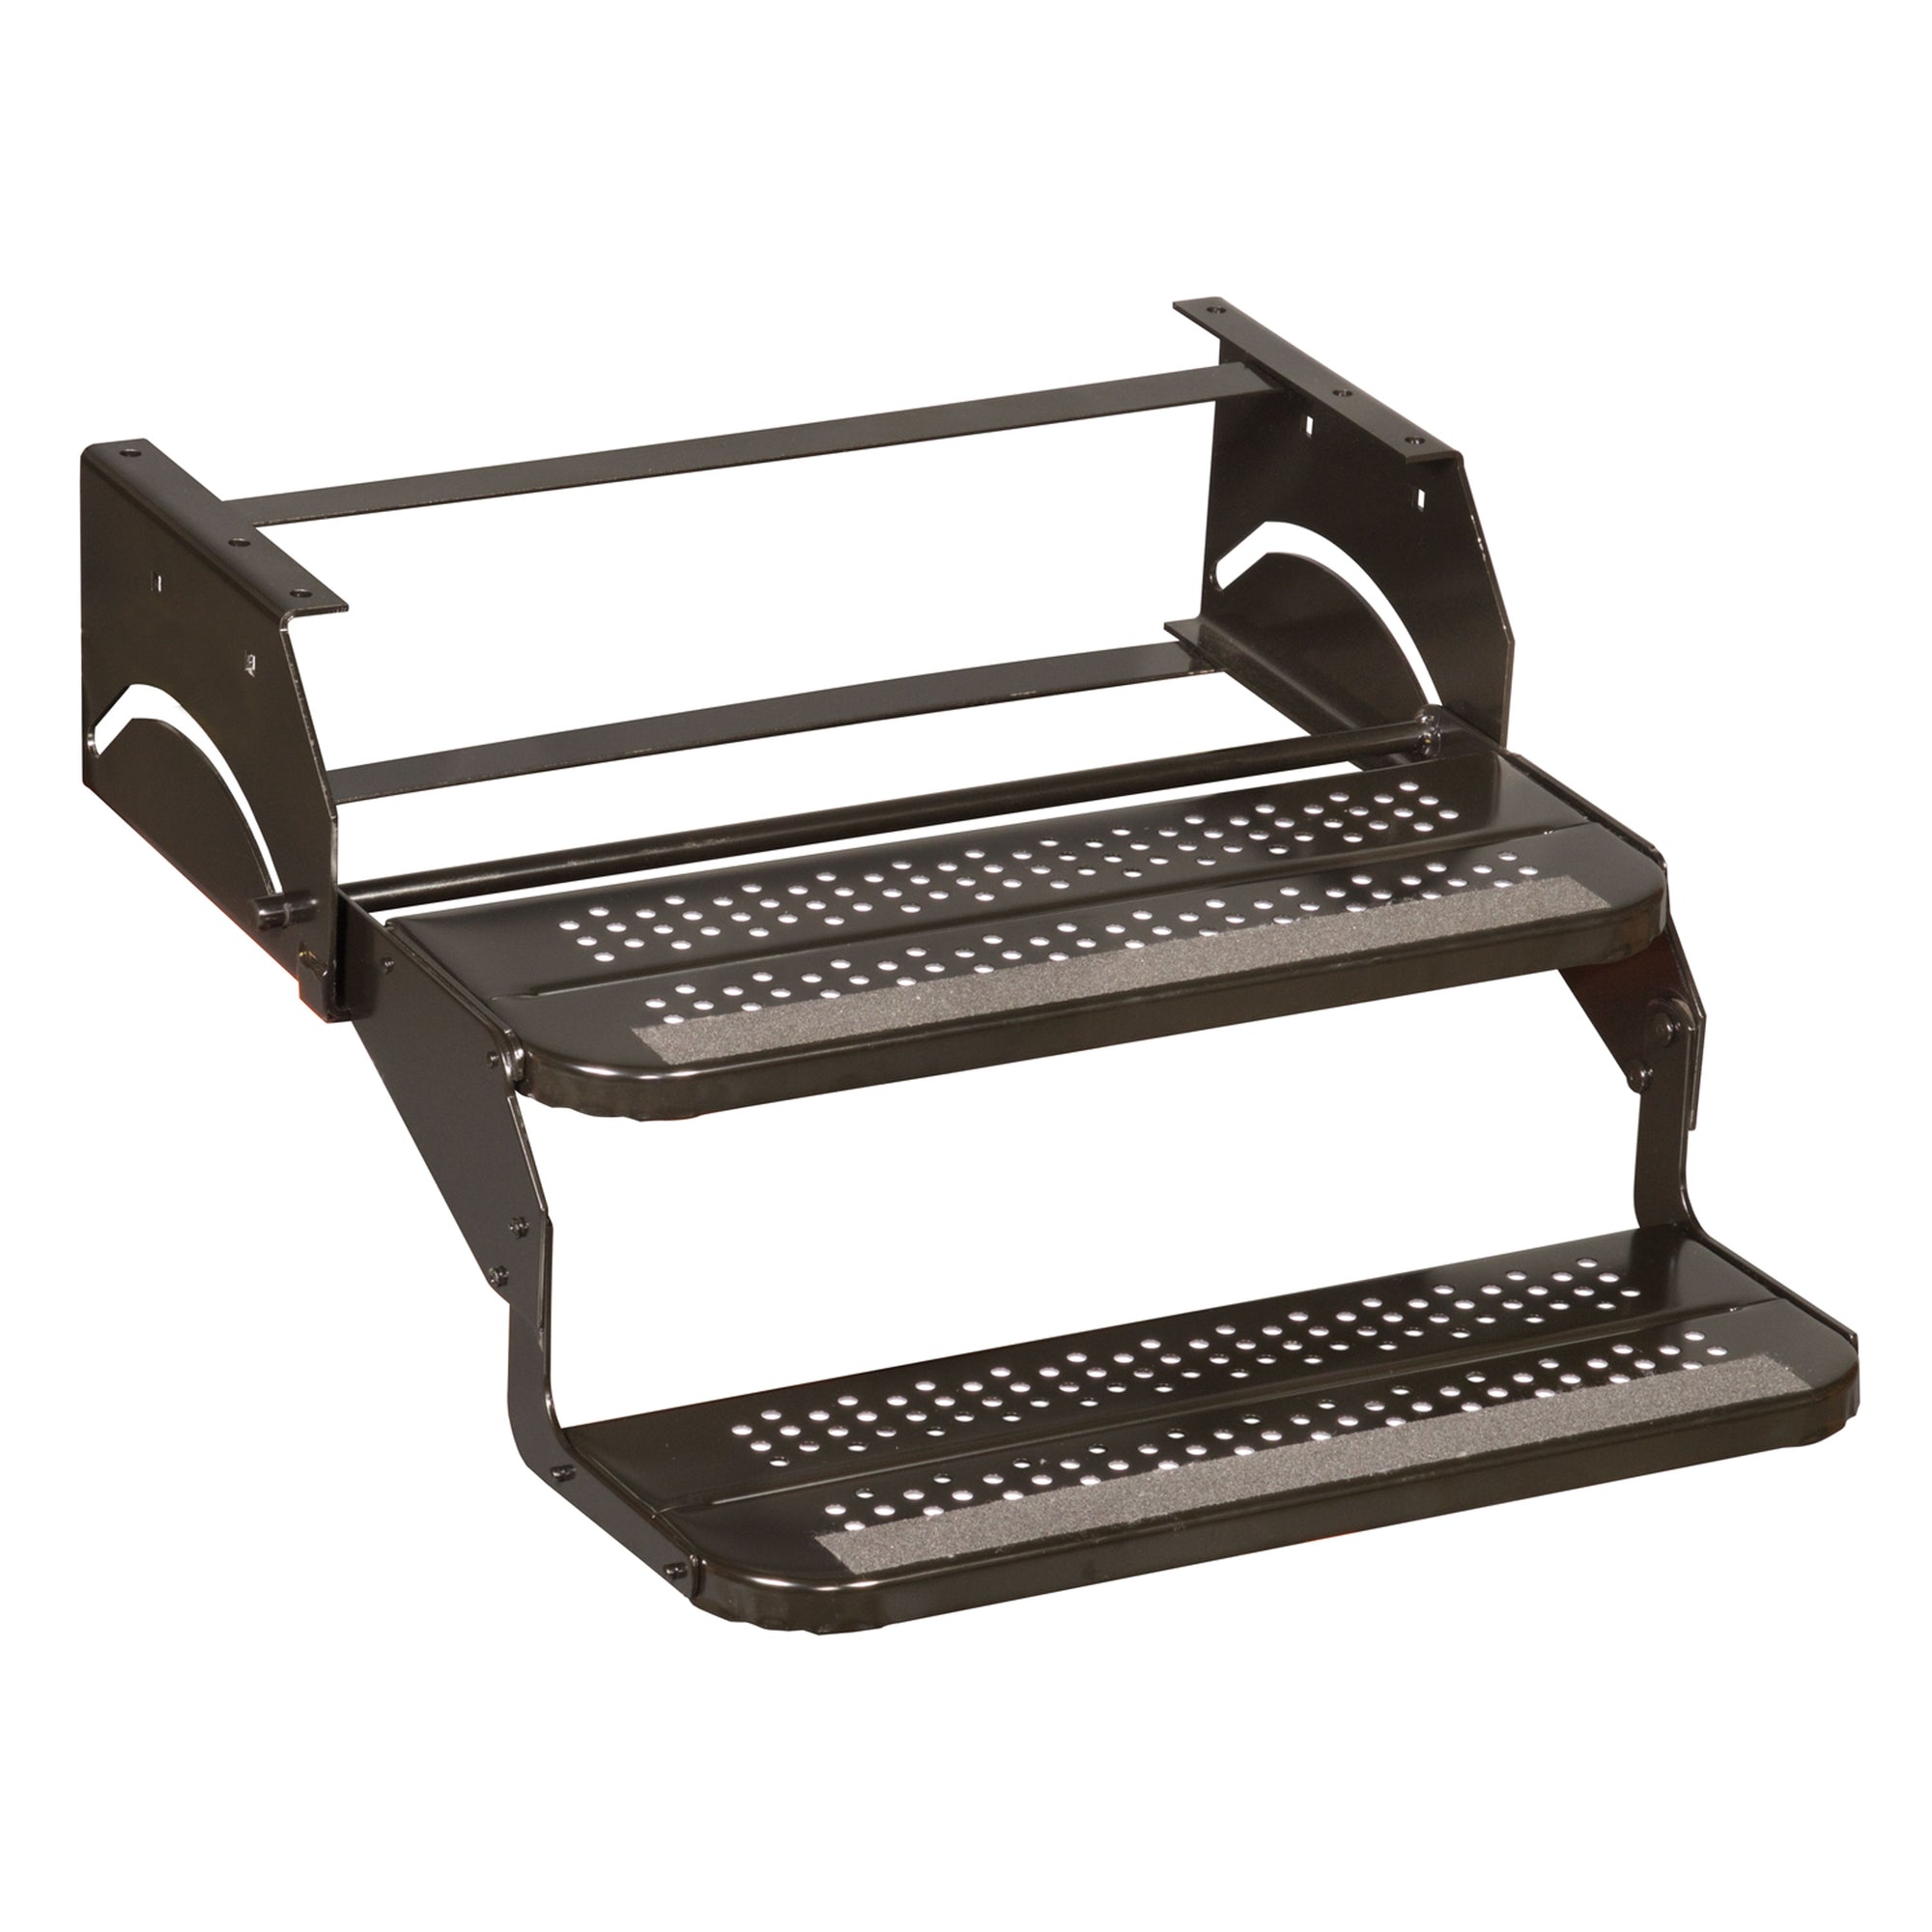 Elkhart Tool & Die 924-9 Standard Double Camper Step with 24" Wide Tread - 15.75" Drop and 9" Risers